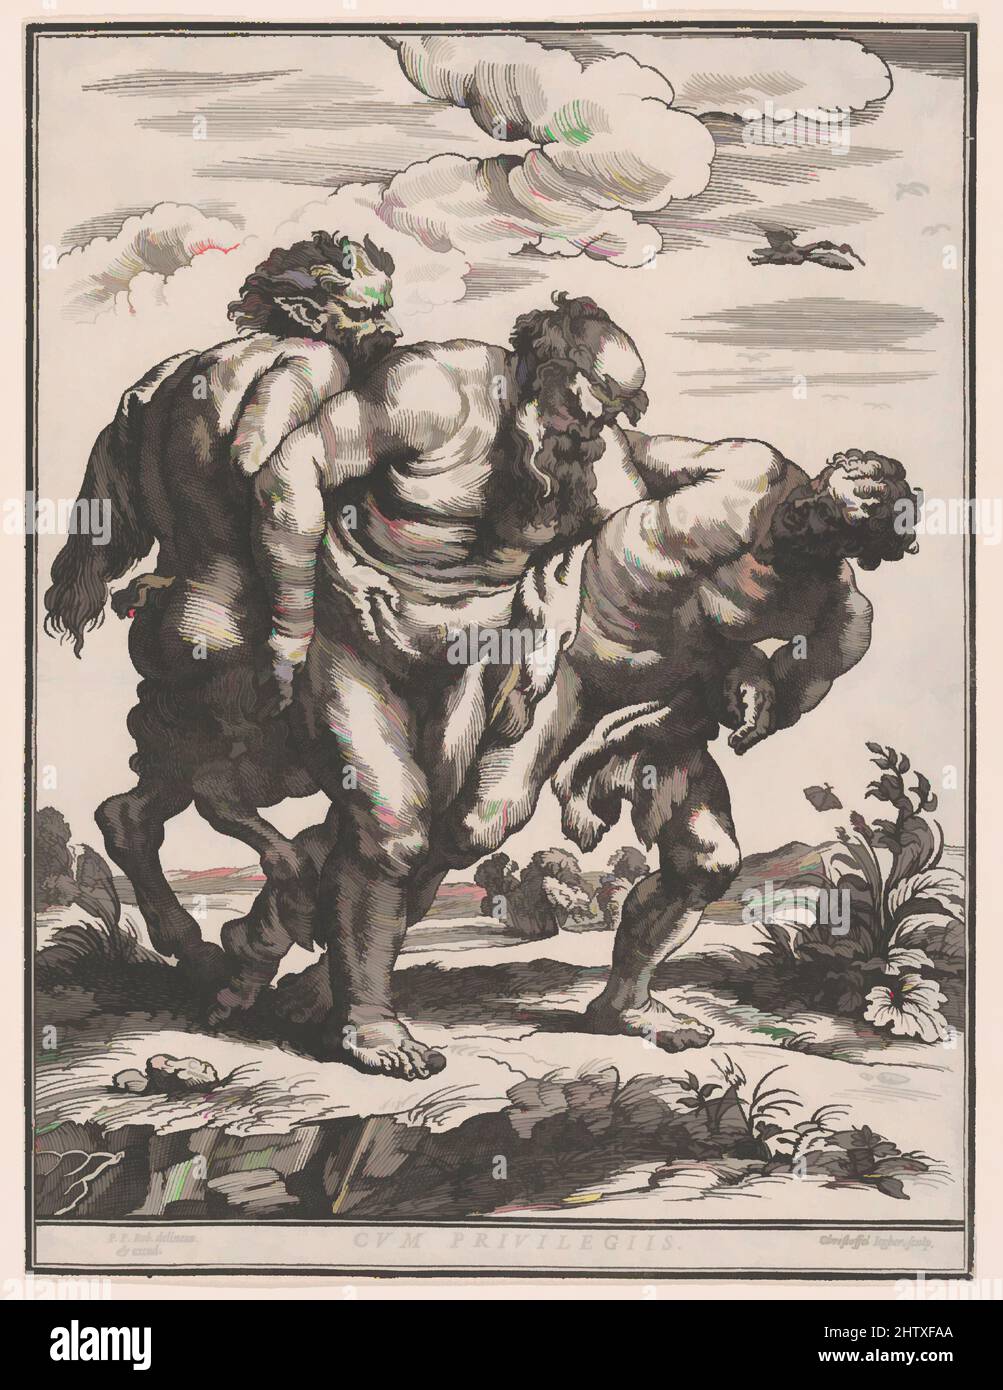 Art inspired by The March of Silenus, ca. 1652, Woodcut, Sheet: 17 5/8 × 13 3/8 in. (44.7 × 33.9 cm), Prints, Christoffel Jegher (Flemish, 1596–1652/53), after Peter Paul Rubens (Flemish, Siegen 1577–1640 Antwerp, Classic works modernized by Artotop with a splash of modernity. Shapes, color and value, eye-catching visual impact on art. Emotions through freedom of artworks in a contemporary way. A timeless message pursuing a wildly creative new direction. Artists turning to the digital medium and creating the Artotop NFT Stock Photo